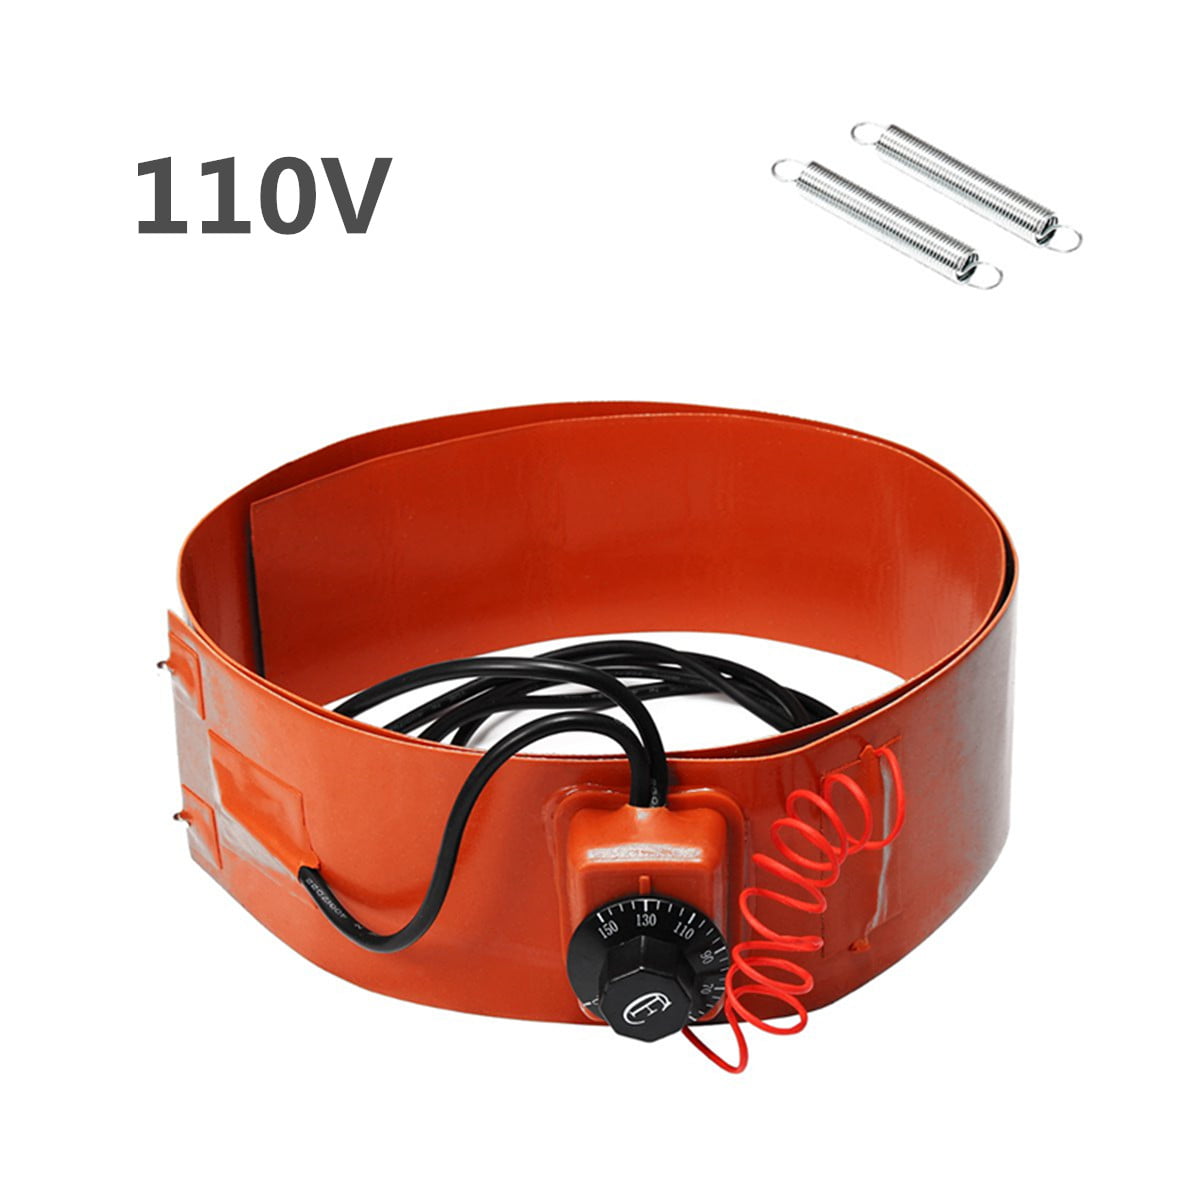 700W 110/220V Silicone Drum Heater Energy Thermostat Control Biodiesel Equipment 